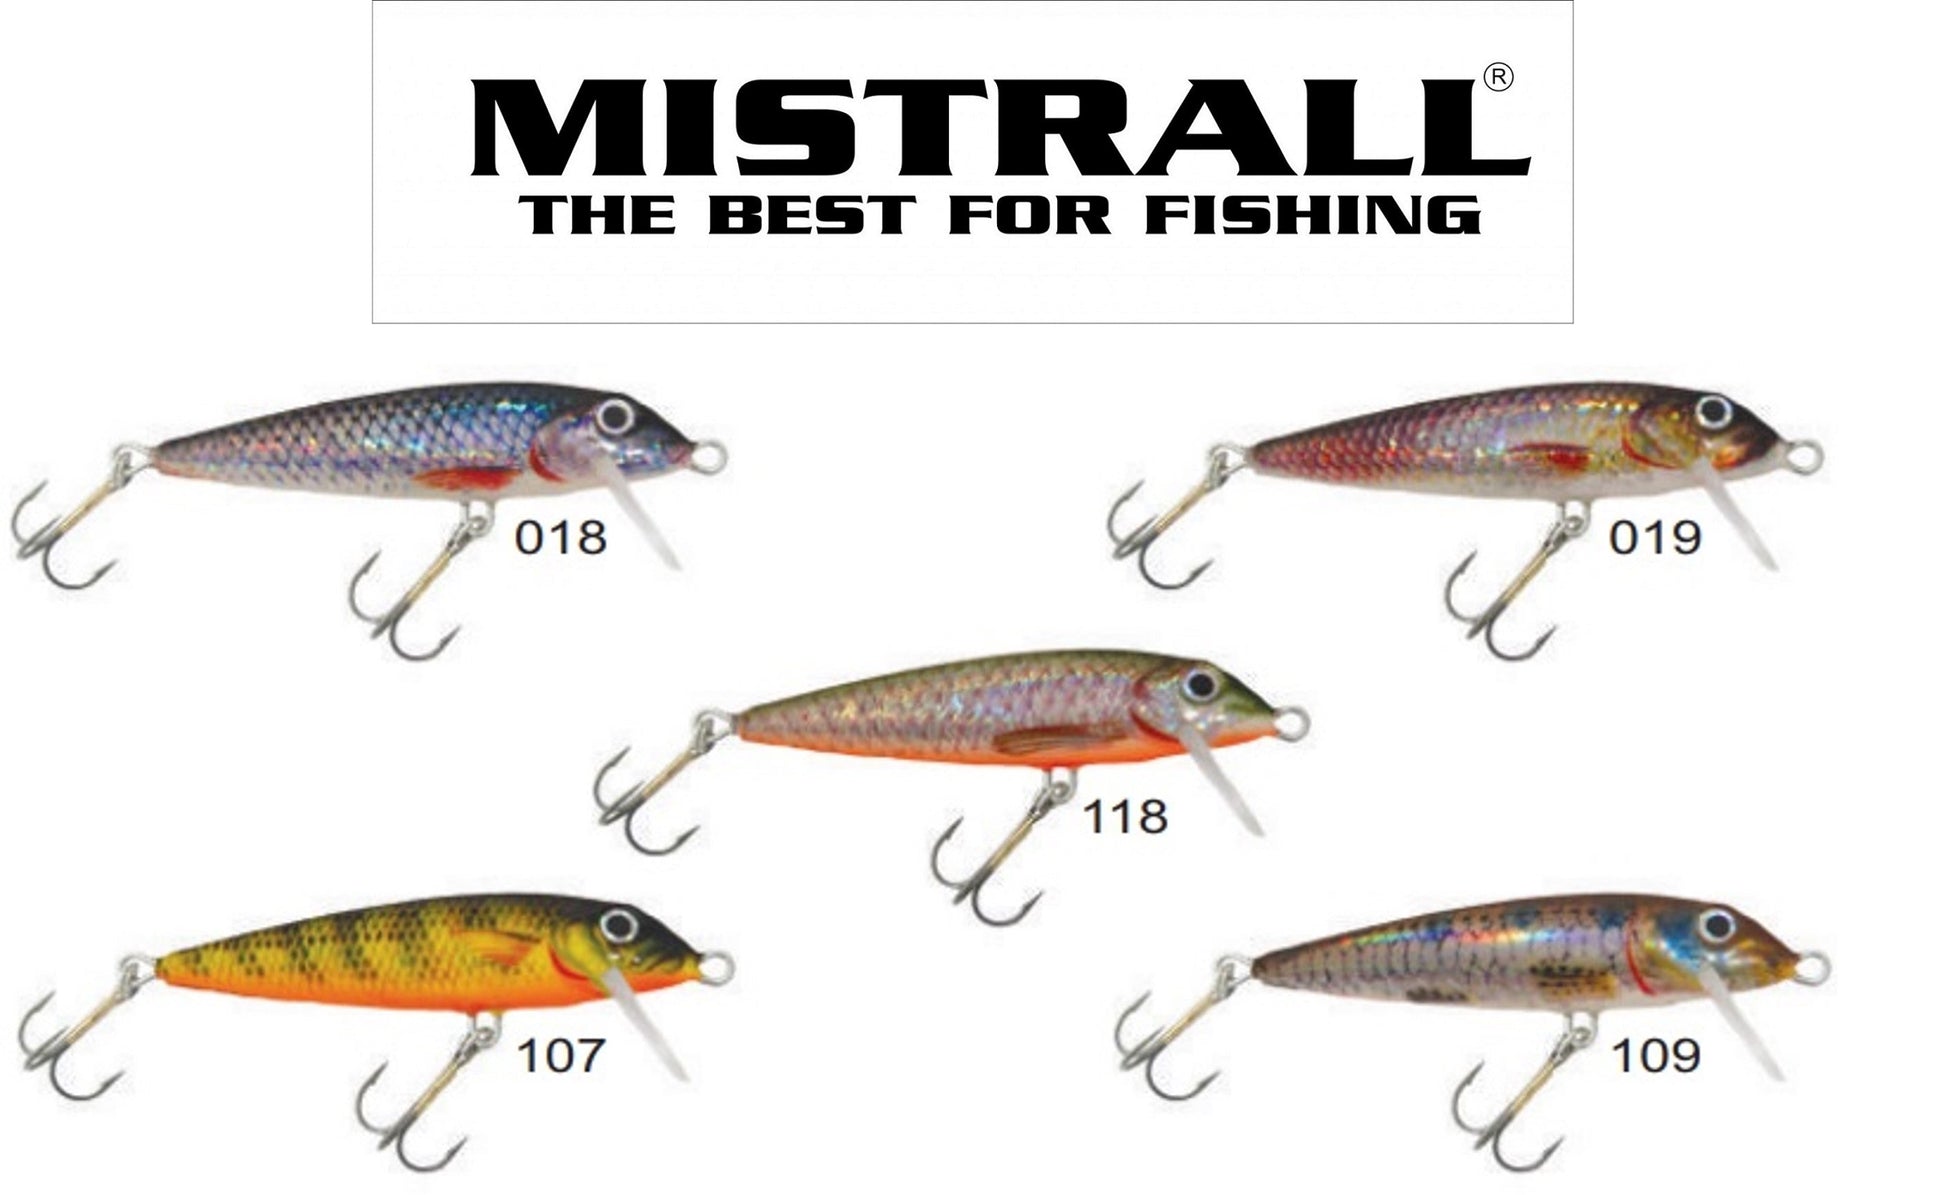 Mistrall Fishing Scales